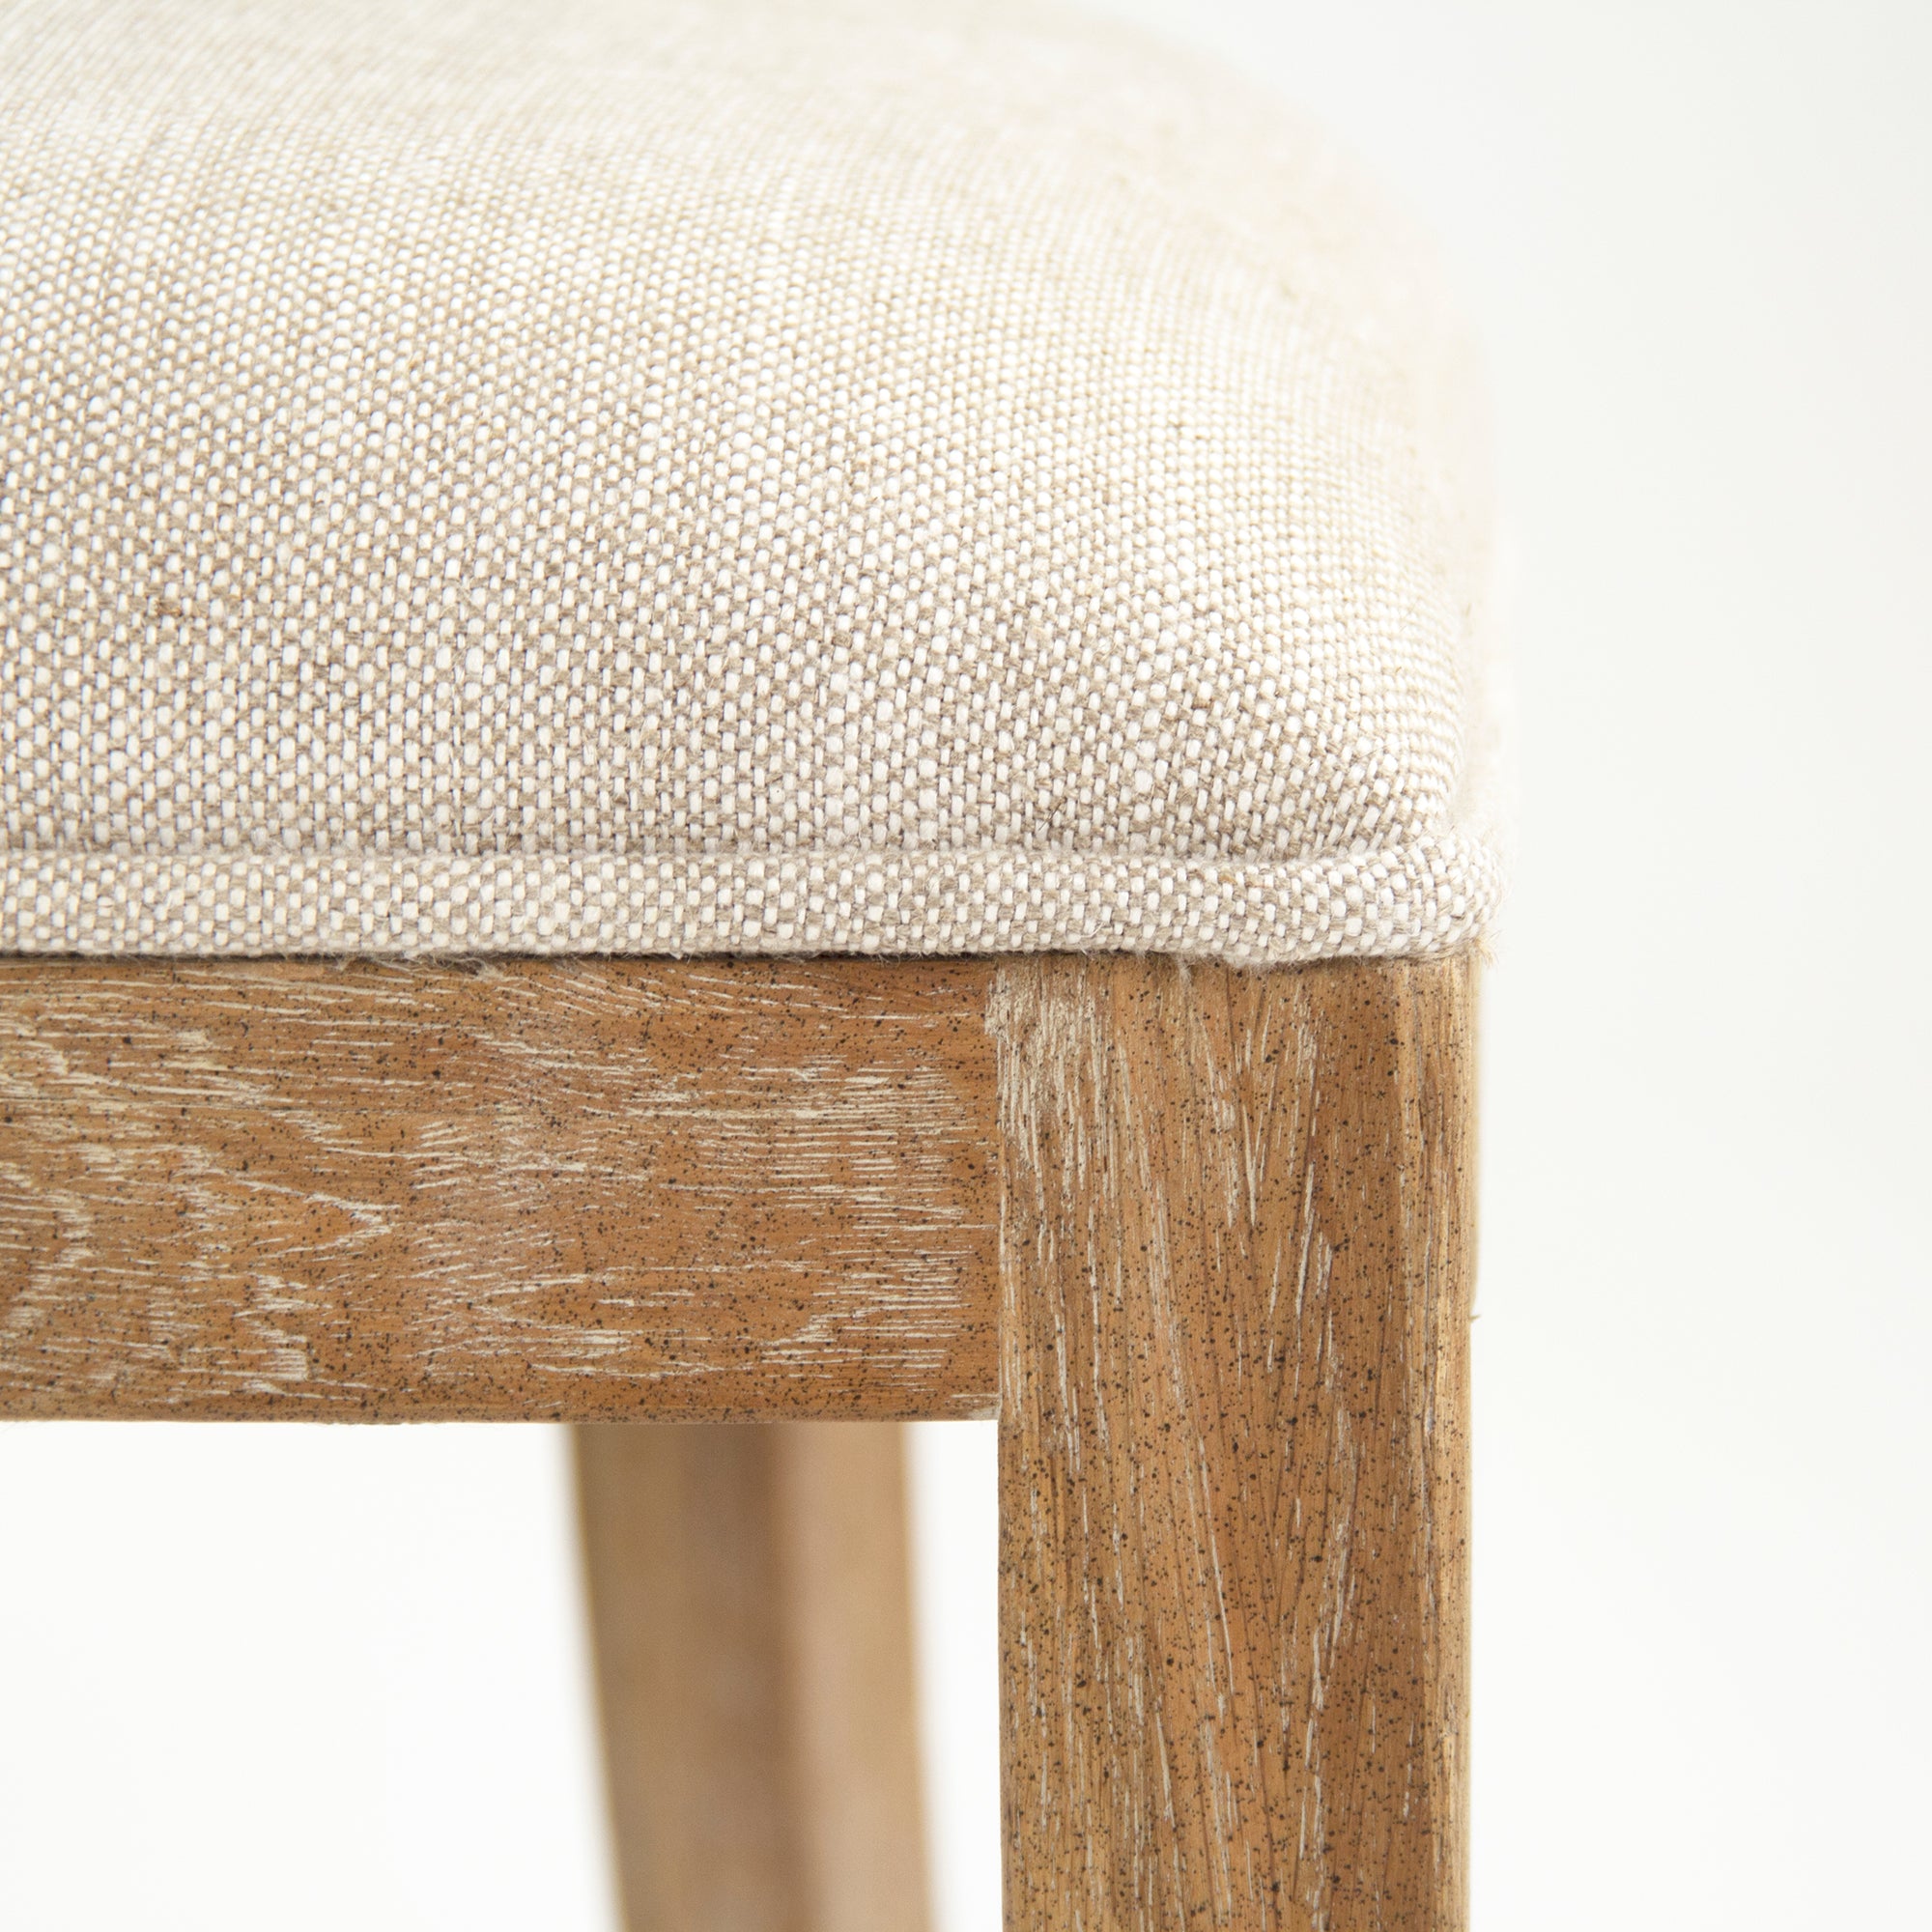 Carvell Caned Back Side Chair